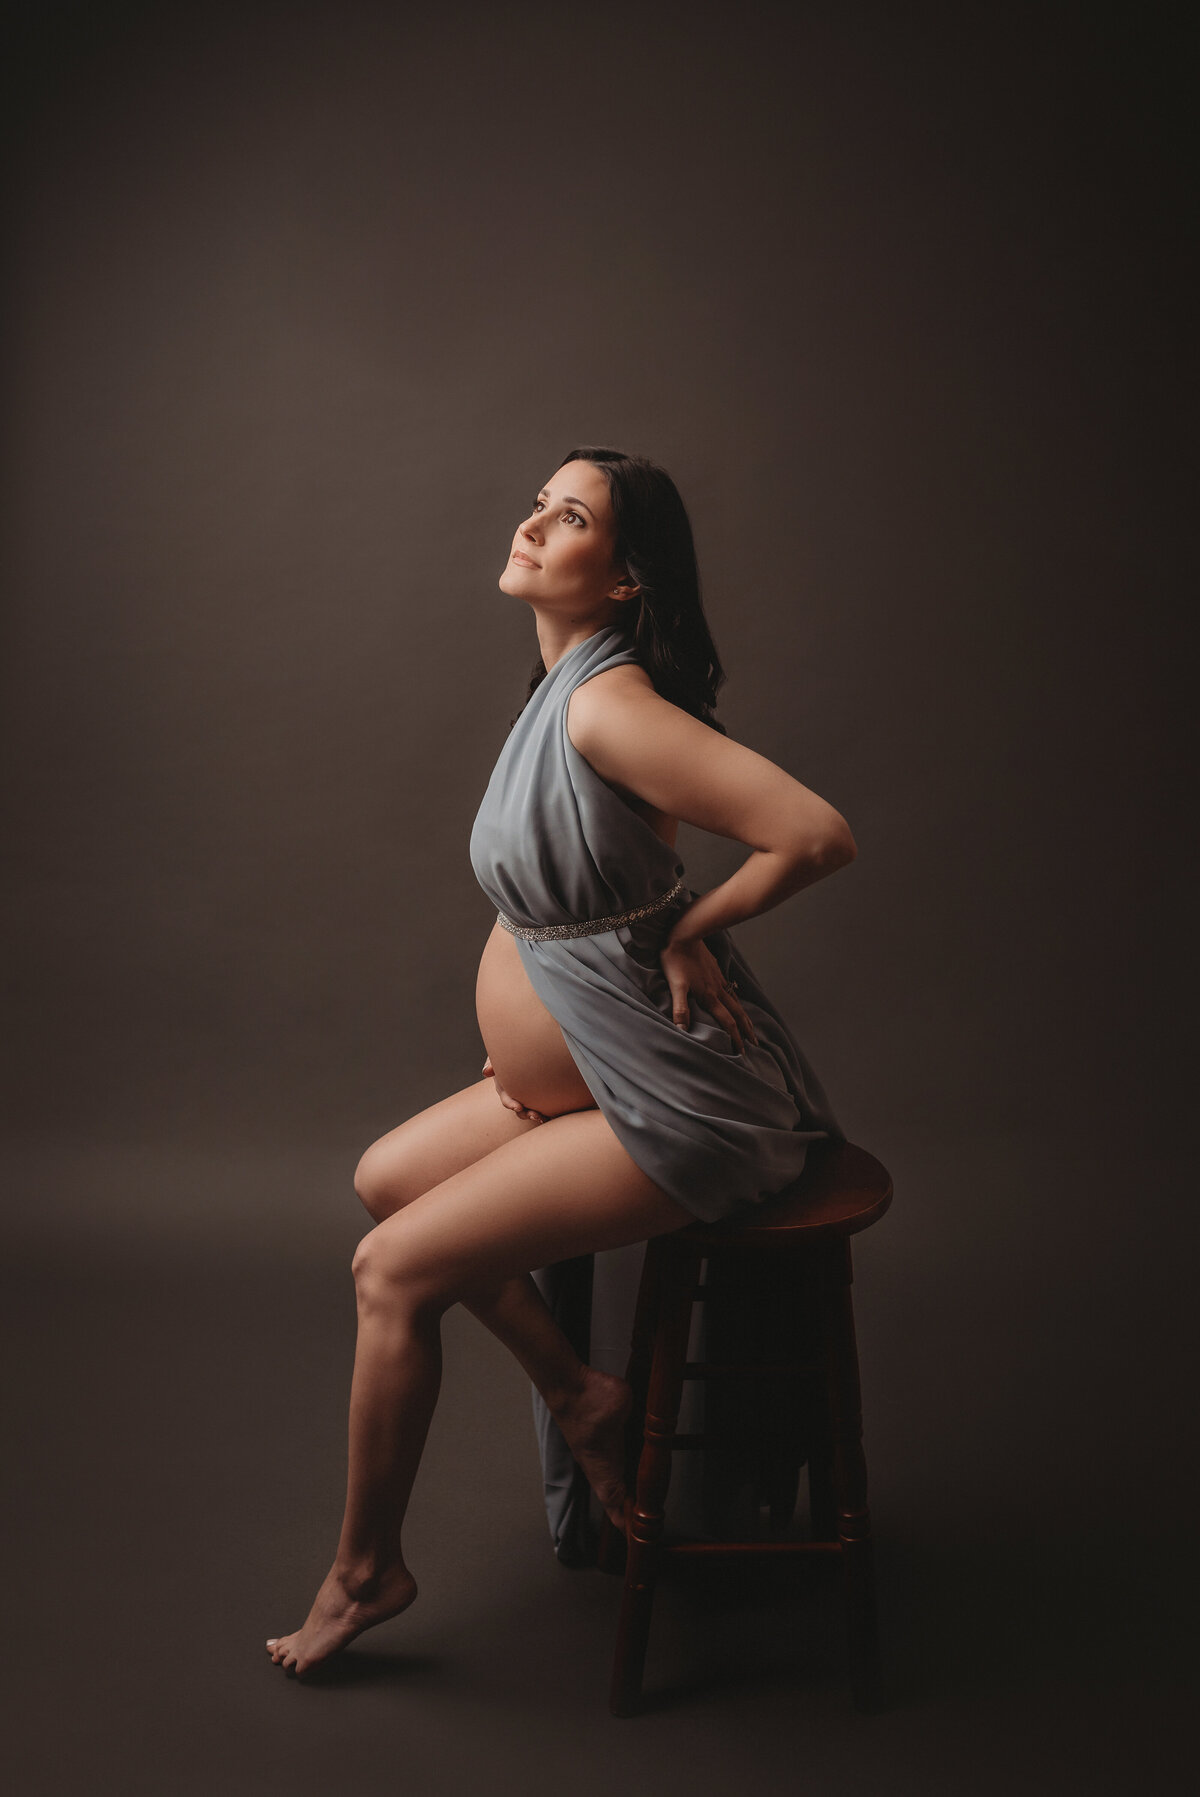 Pregnant mom to be sitting on stool with one leg up on rung of stool, hand on back and leaning forward looking up towards the light